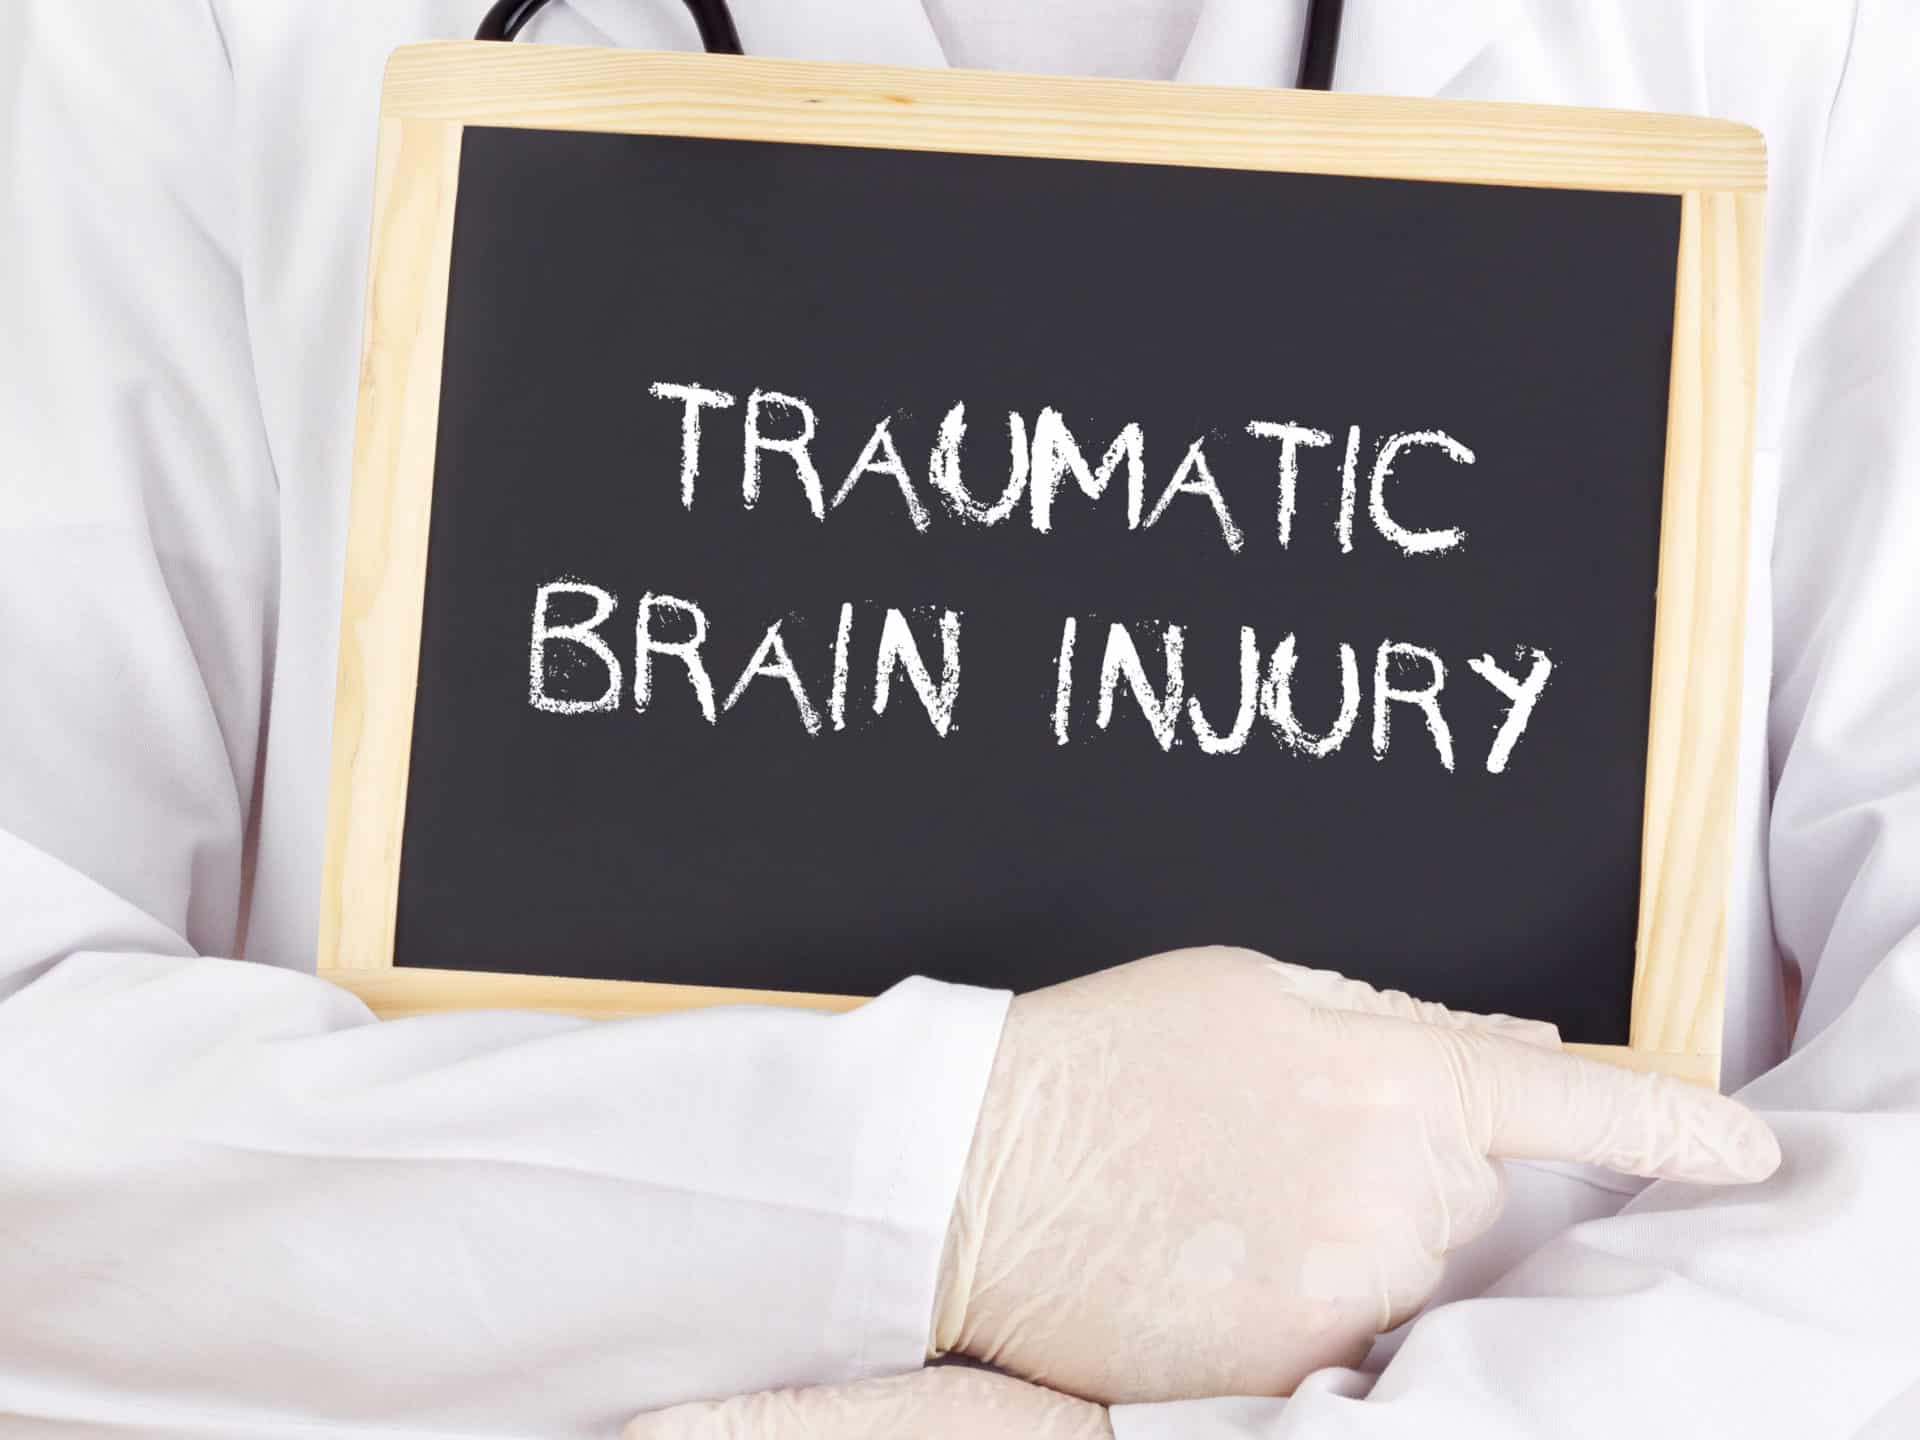 NY Traumatic Brain Injury: You Could Get Compensation